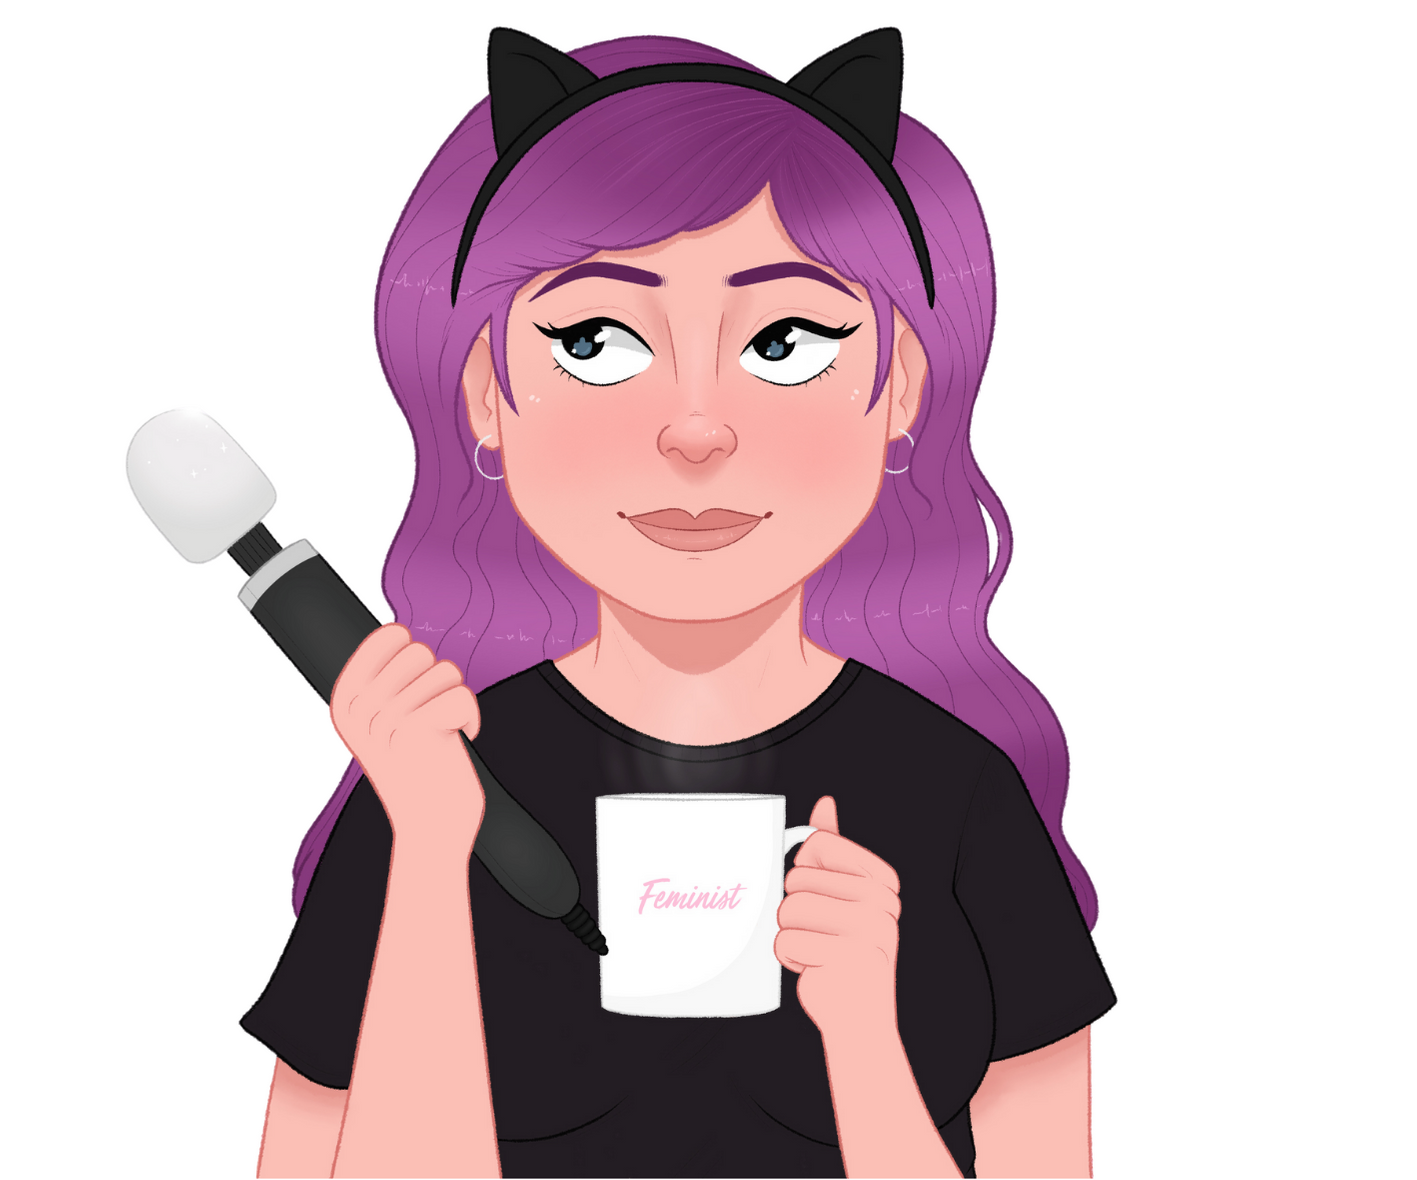 The Coffee and Kink logo - a cartoon portrait of a white woman in black cat ears with purple hair, holding a wand vibrator and a coffee cup